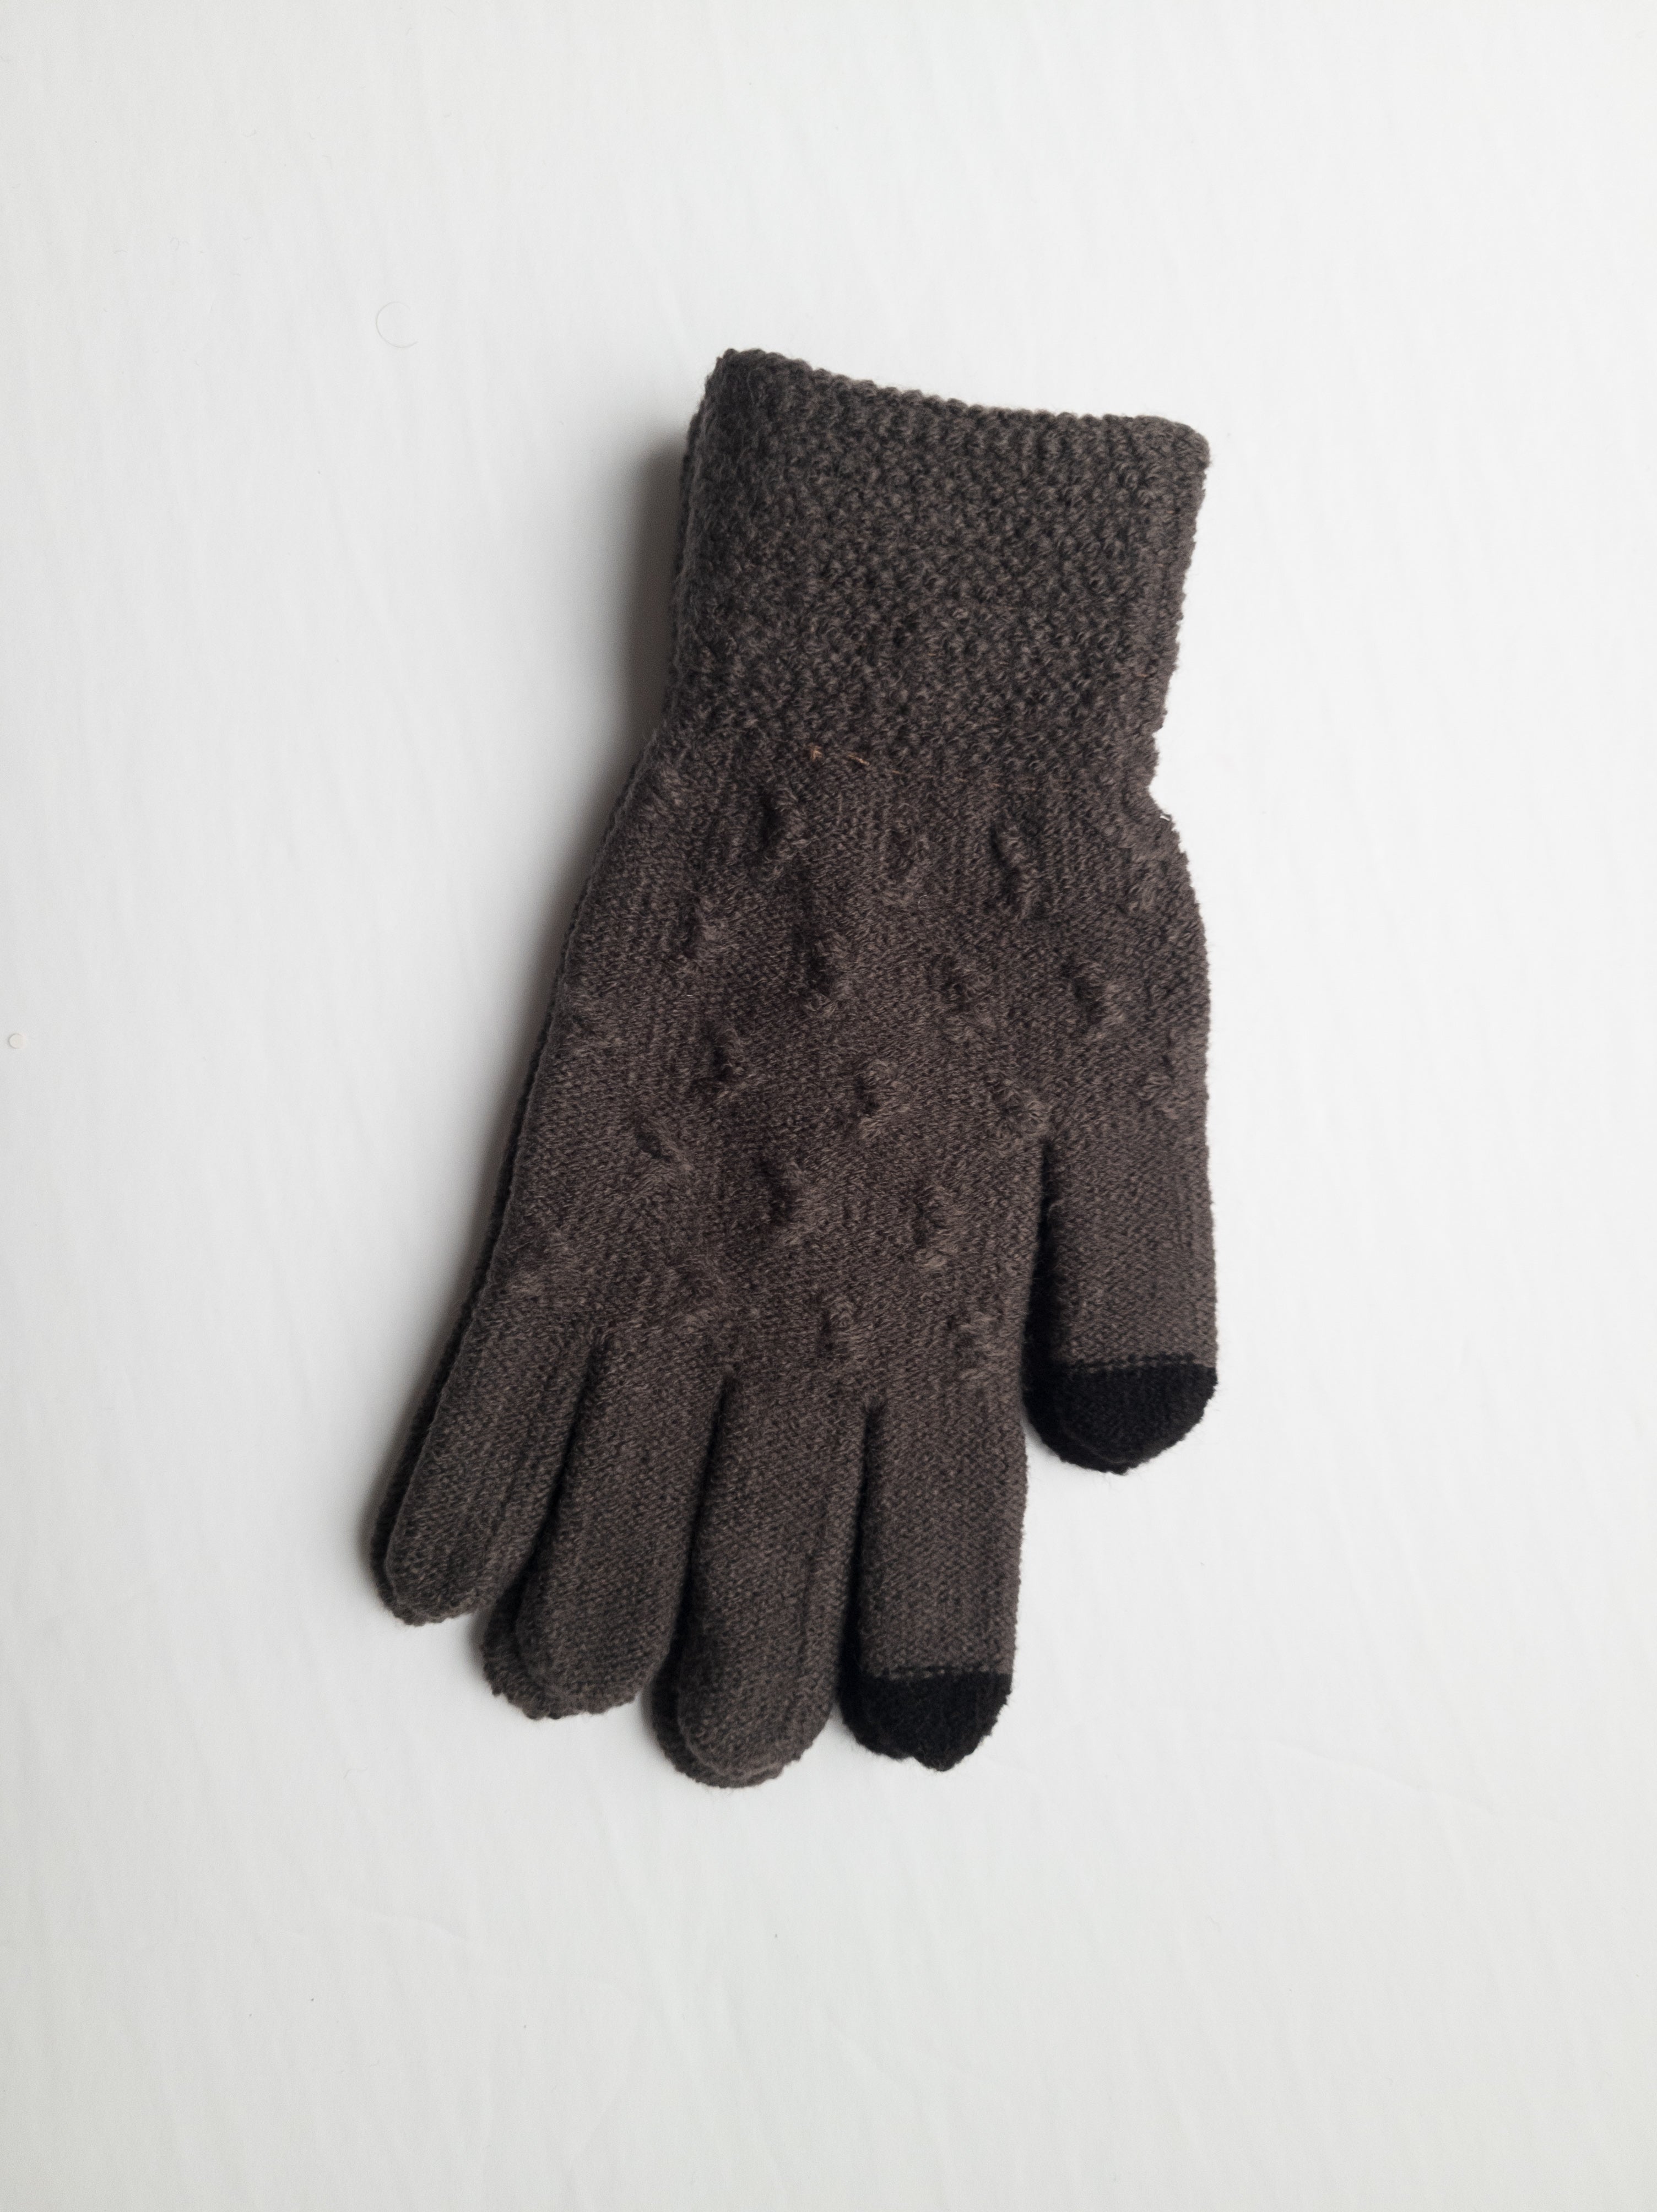 Youth Knitted Gloves